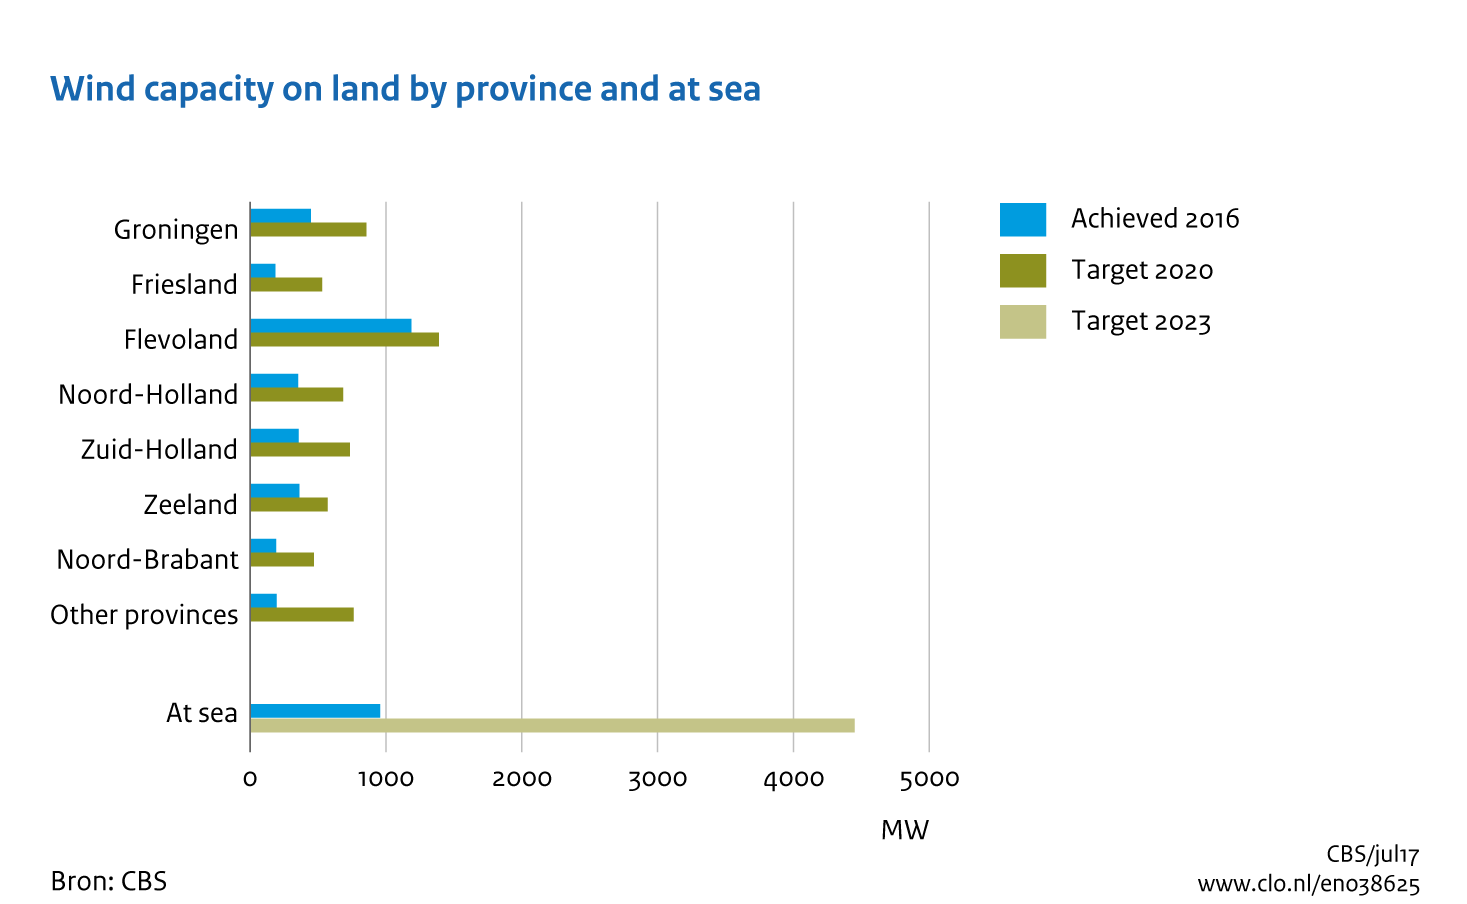 Image Wind capacity on land by province and at sea. The image is further explained in the text.